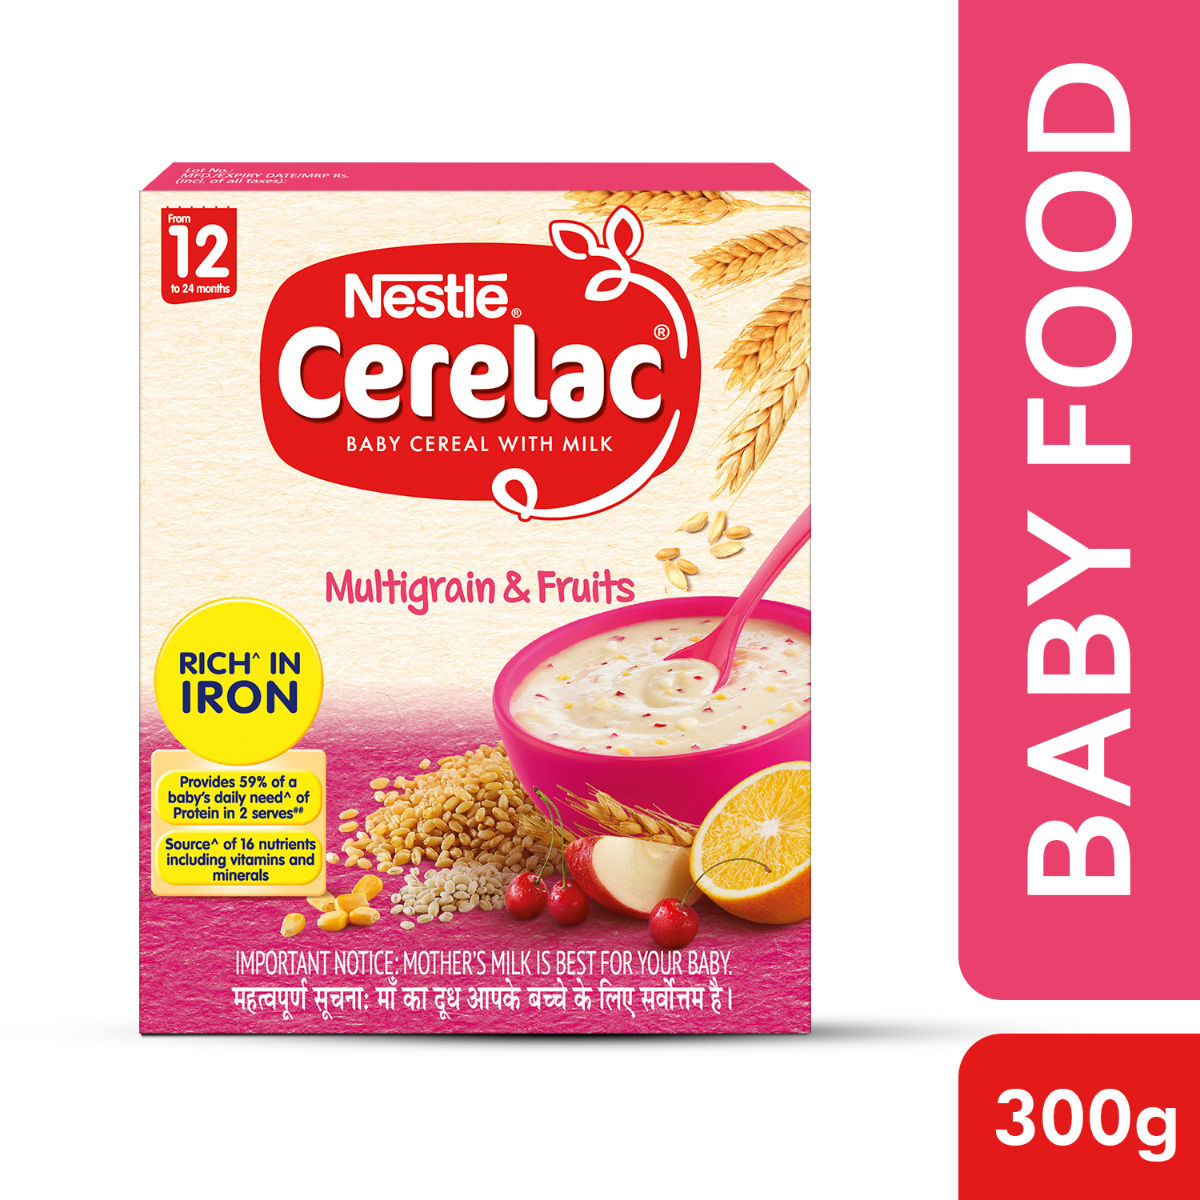 Buy Nestle Cerelac Baby Cereal with Milk Wheat Multigrain & Fruits (From 12 to 24 Months) Powder, 300 gm Refill Pack Online